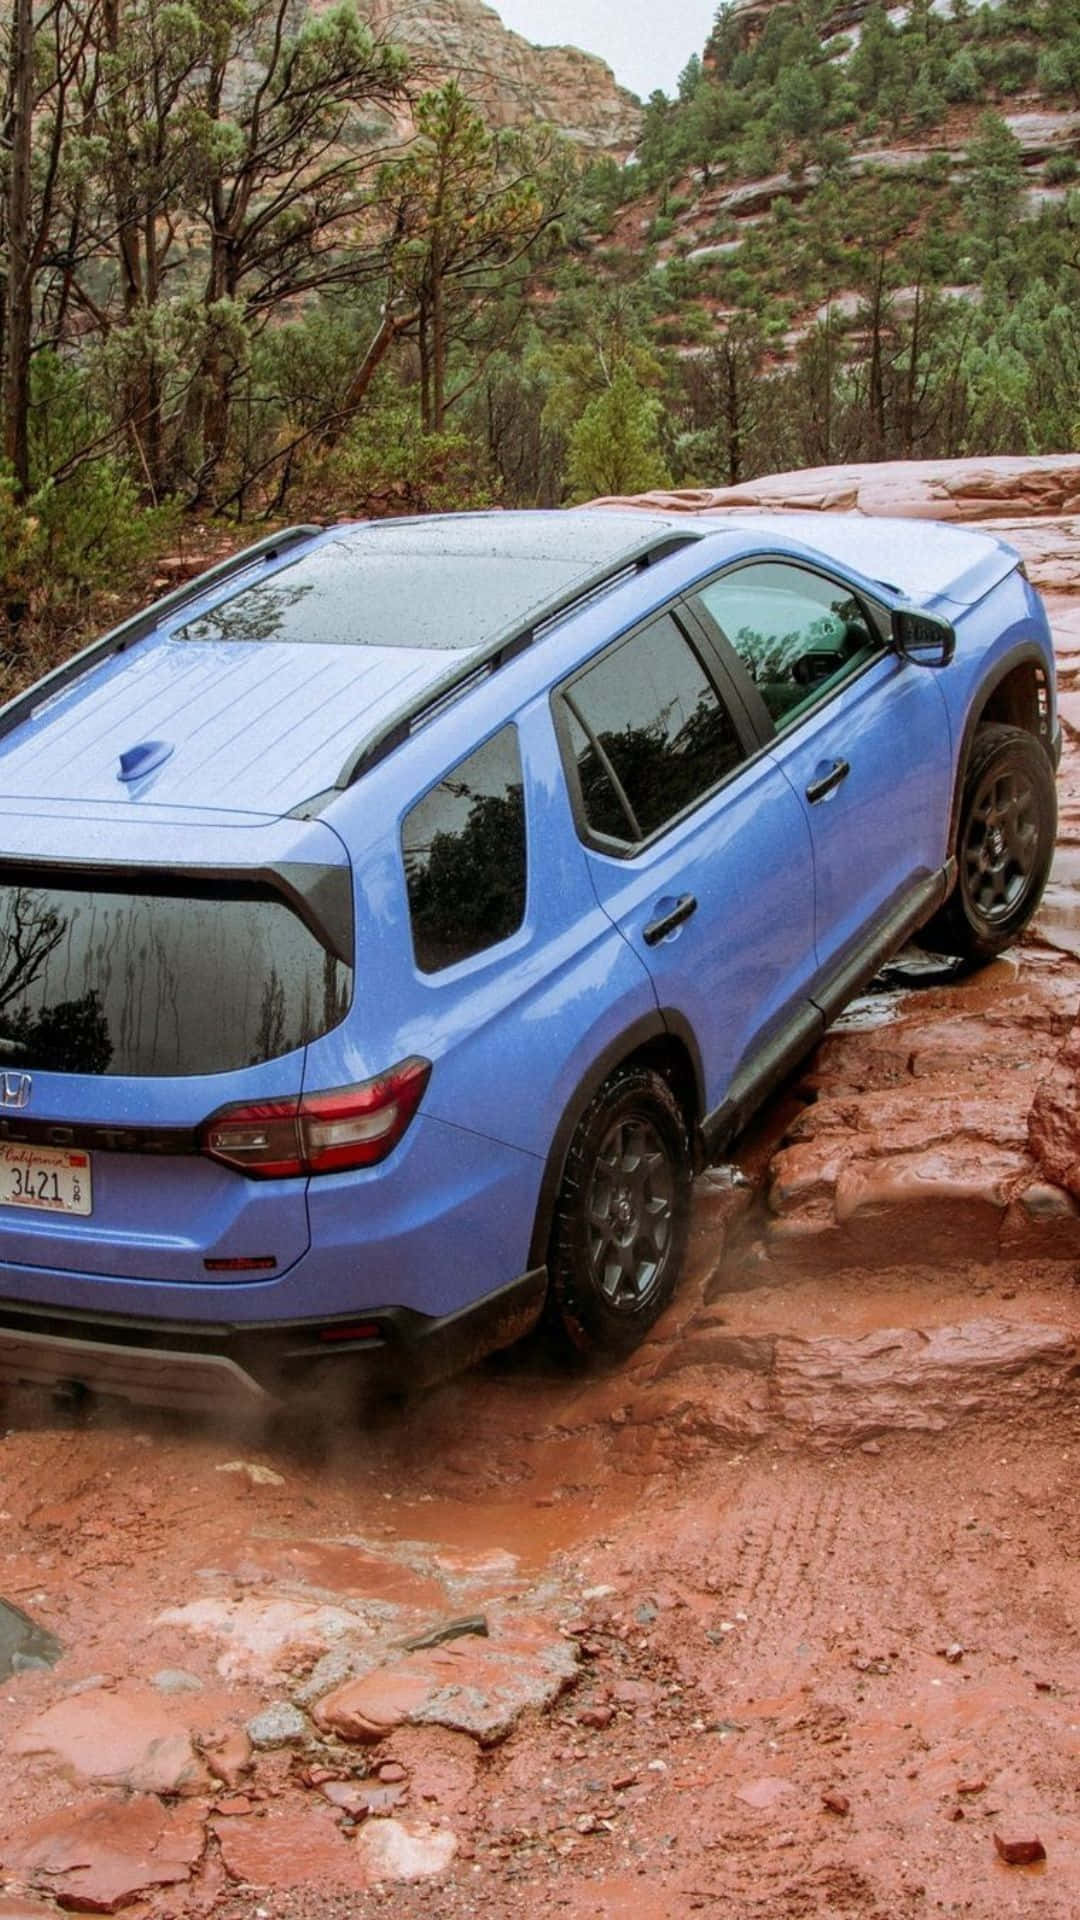 The Blue 2020 Subaru Outback Is Driving Through A Rocky Area